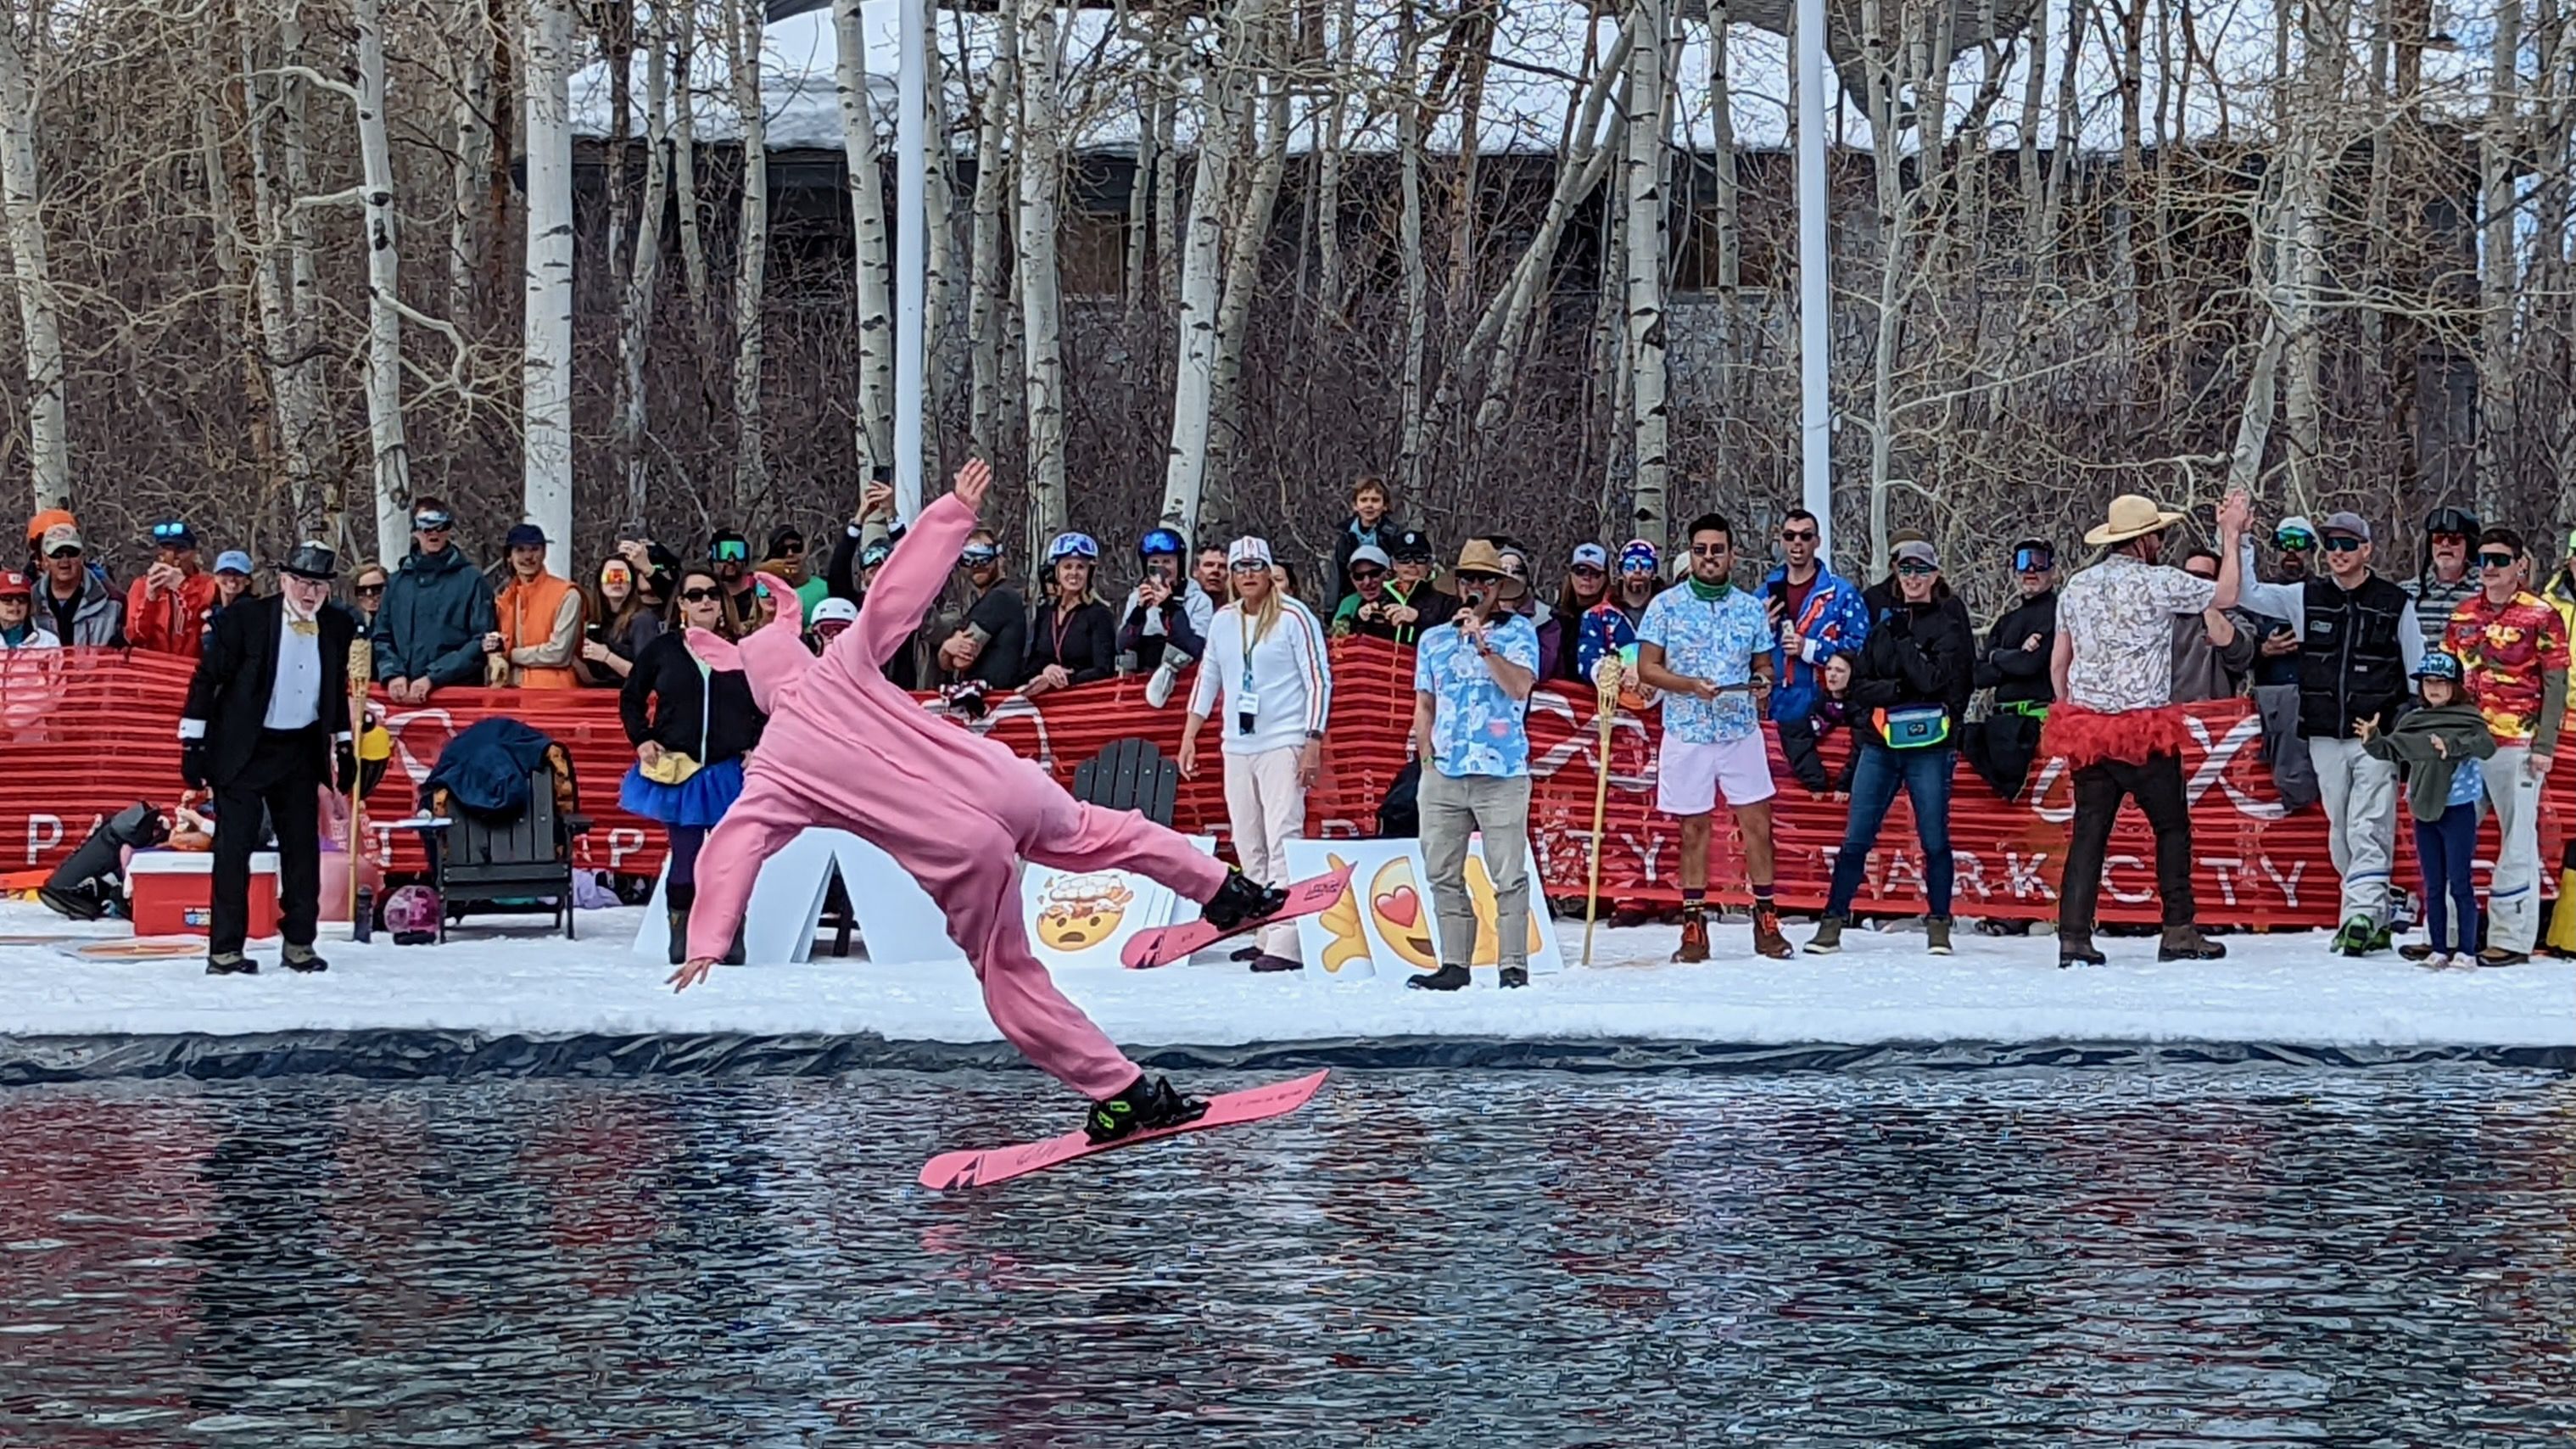 A skier dressed as a pink bunny flies over a pond after a ski jump.